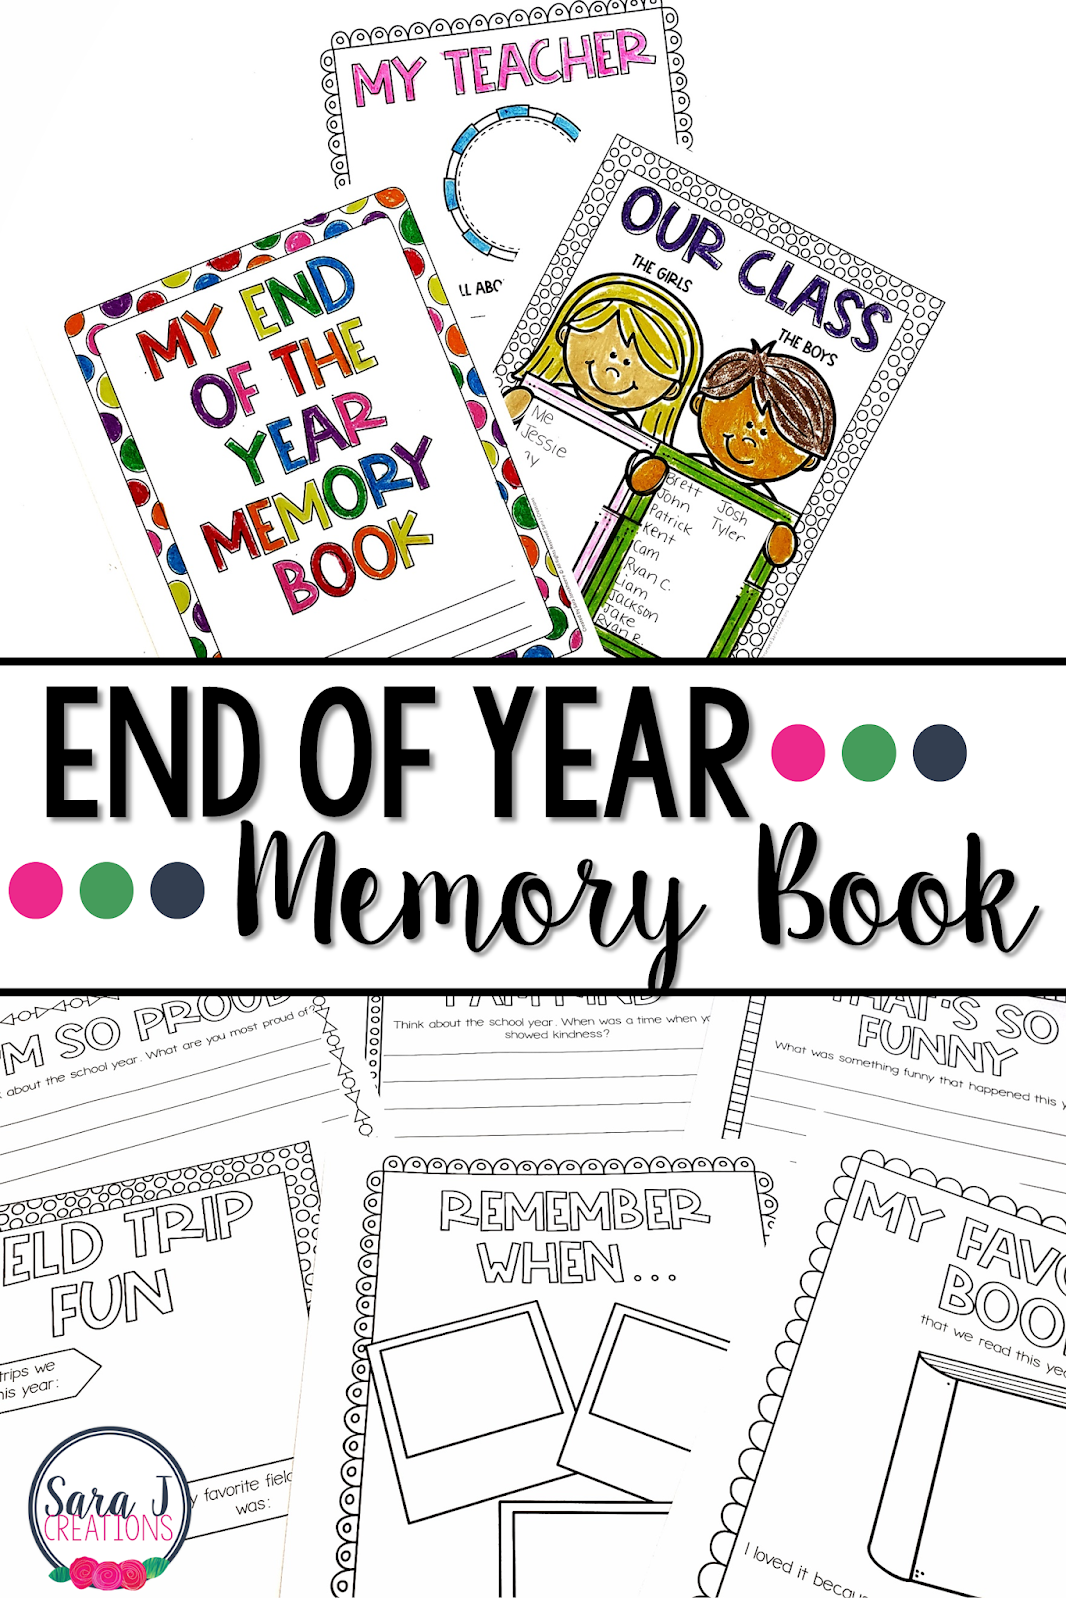 This printable end of the year memory book is the perfect activity for kids. Help them countdown the end of the school year with this fun and reflective idea. Let them reflect on their growth and all of their learning from the past school year and think ahead to summer and next school year.